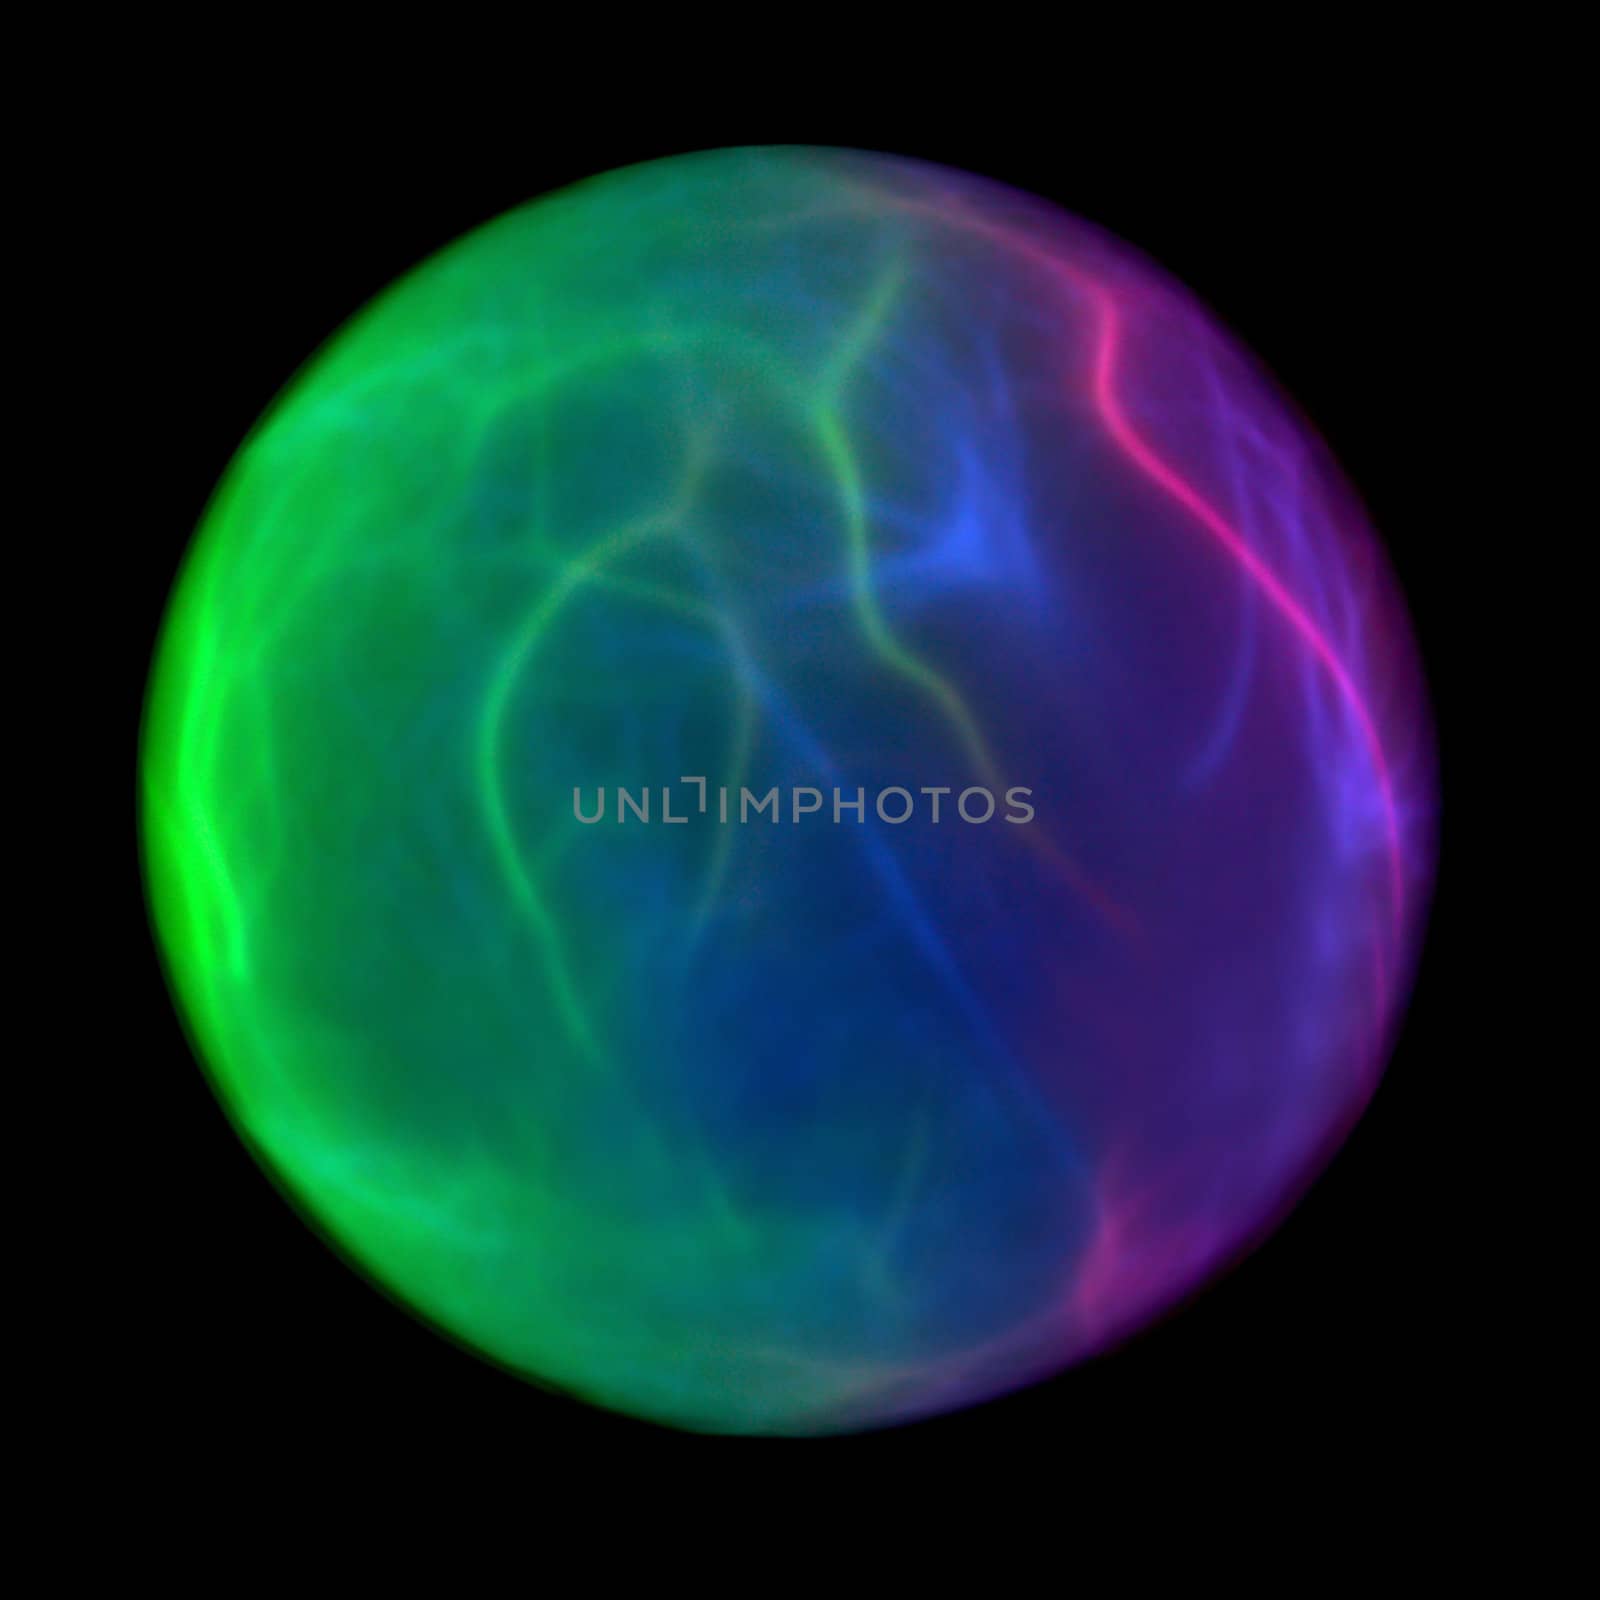 An electric globe with green, blue and purple rays. A great abstract "world" photo! :)